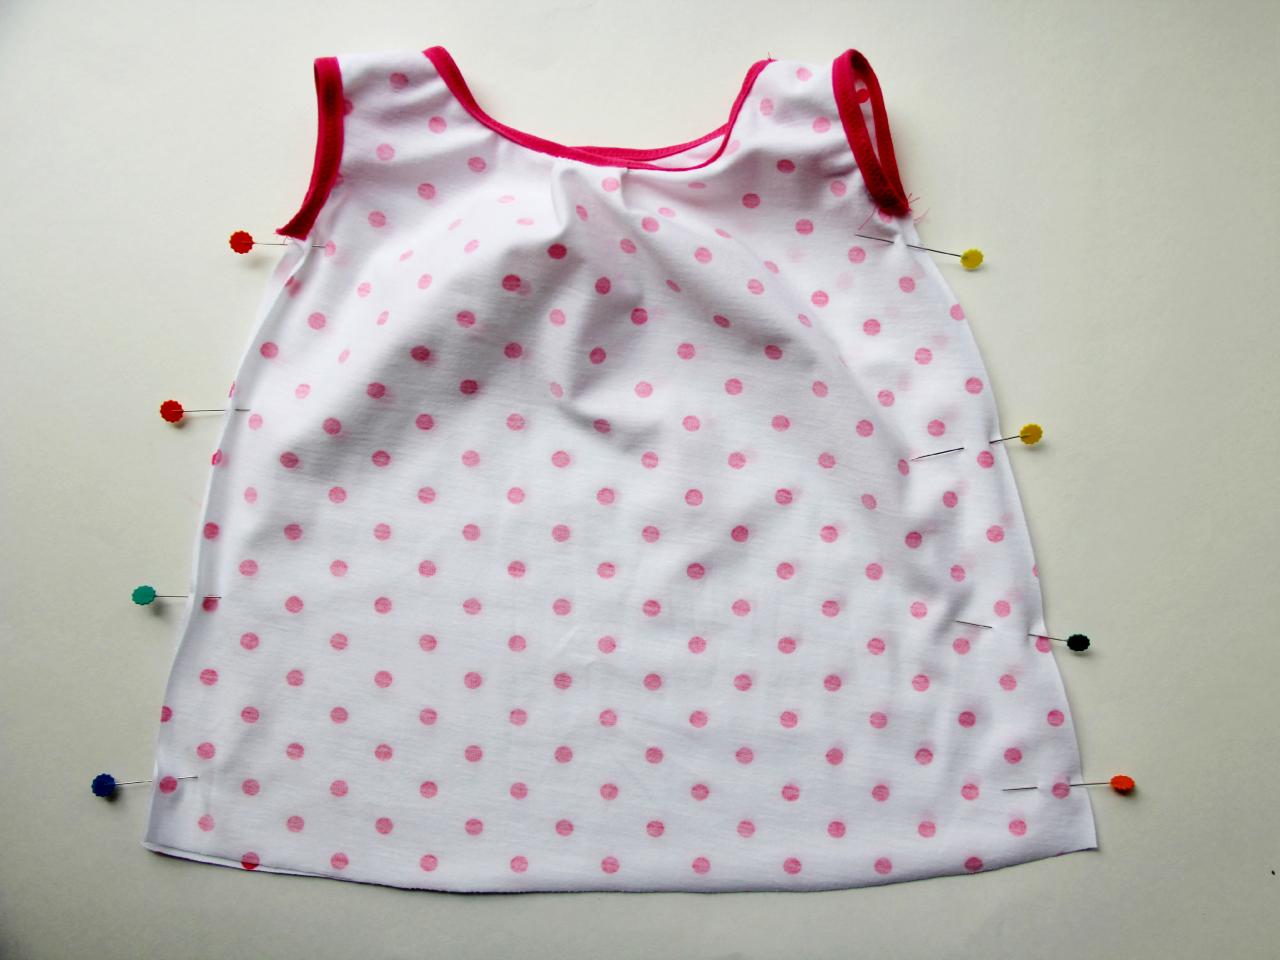 hand stitched baby frocks